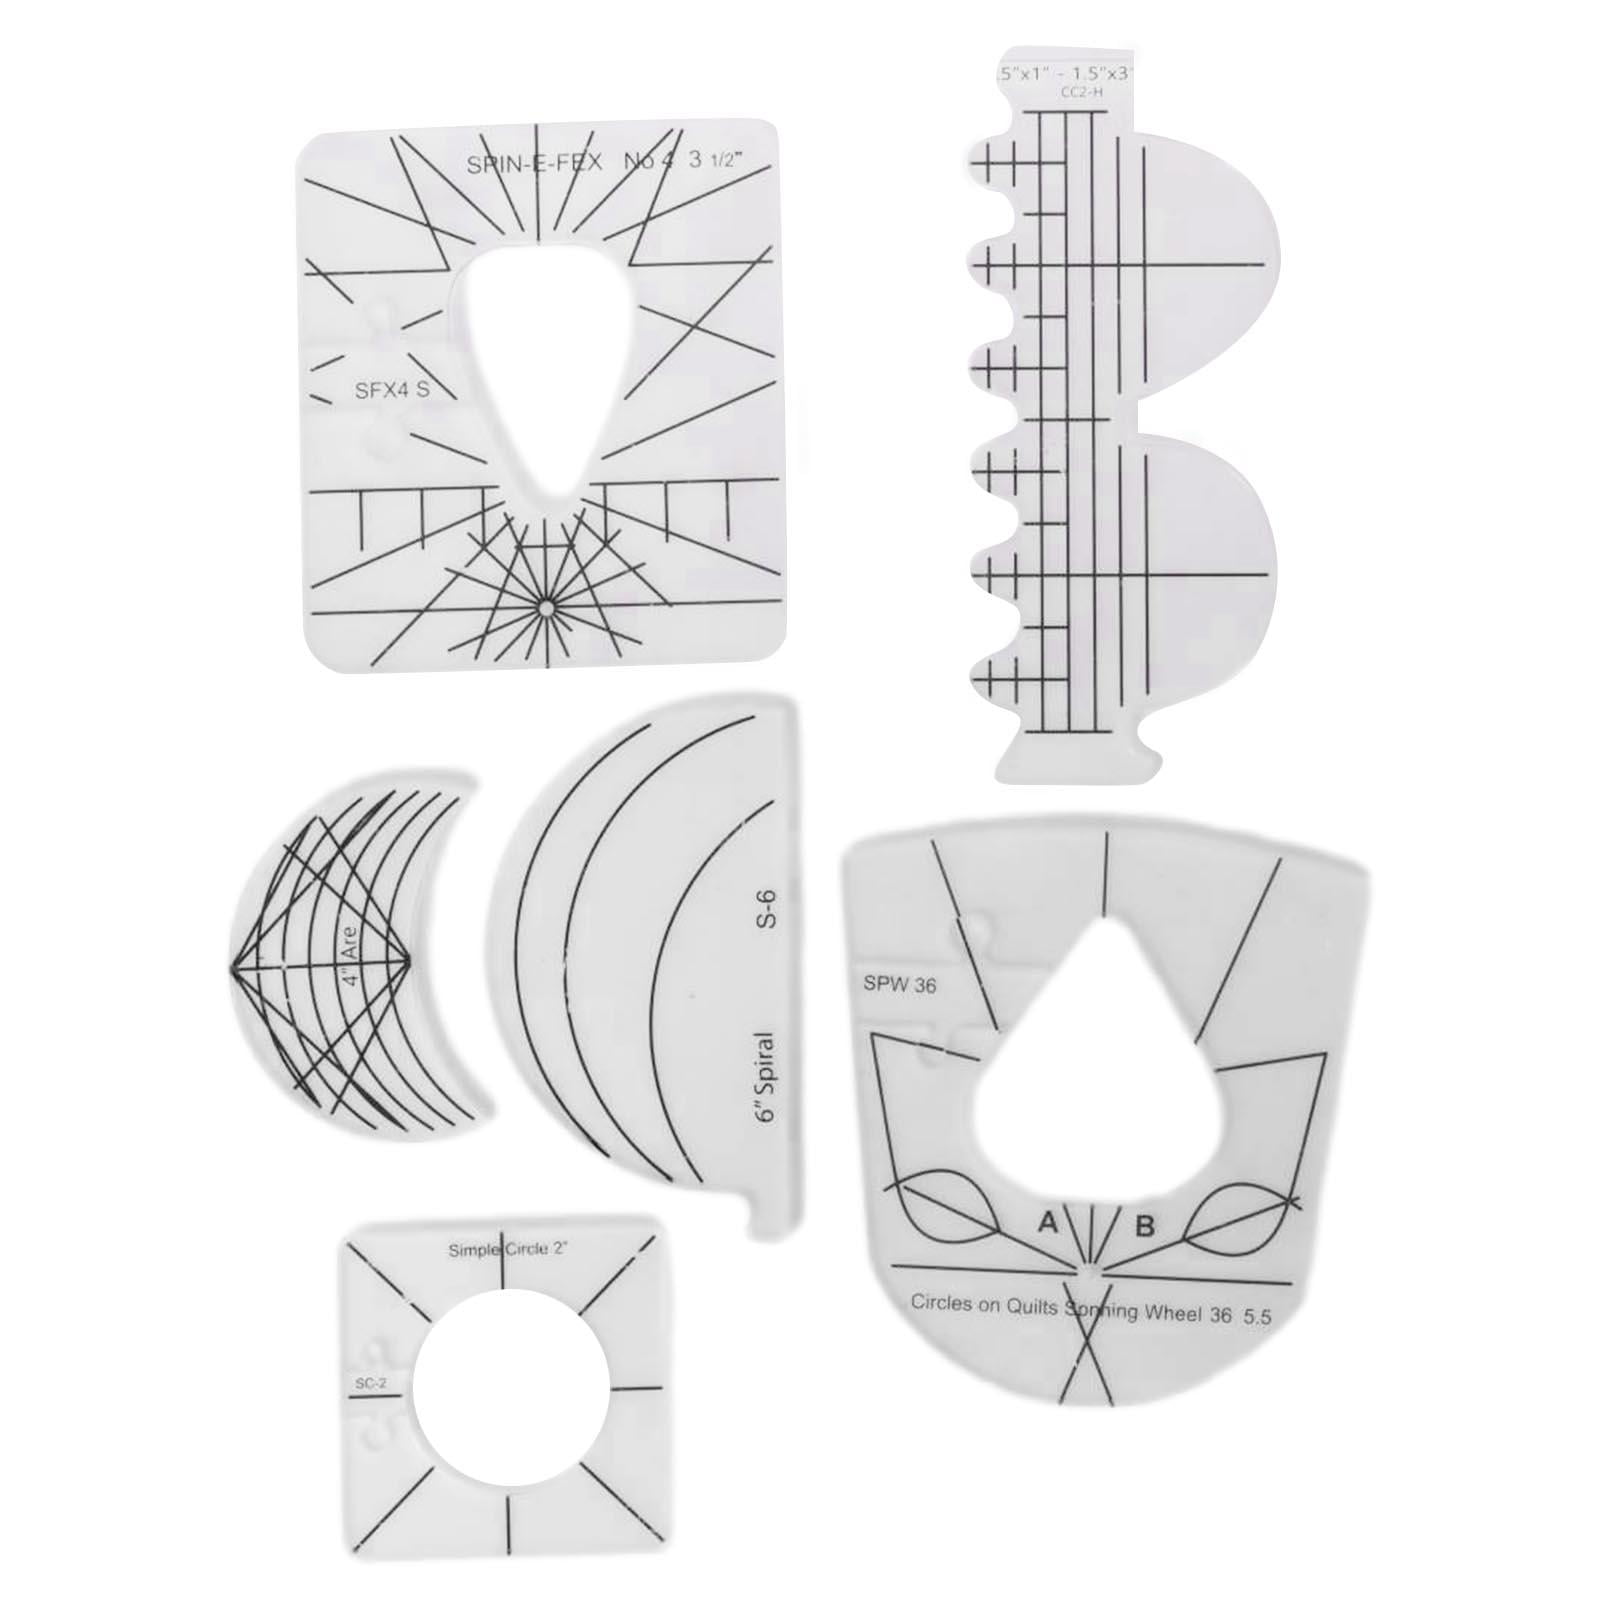 6 pcs/set Transparent Free Motion Quilting Template Rulers Acrylic Quilting Templates Sewing Rulers for Home Sewing Machine Practical DIY Sewing Tools for Sewing Lovers 